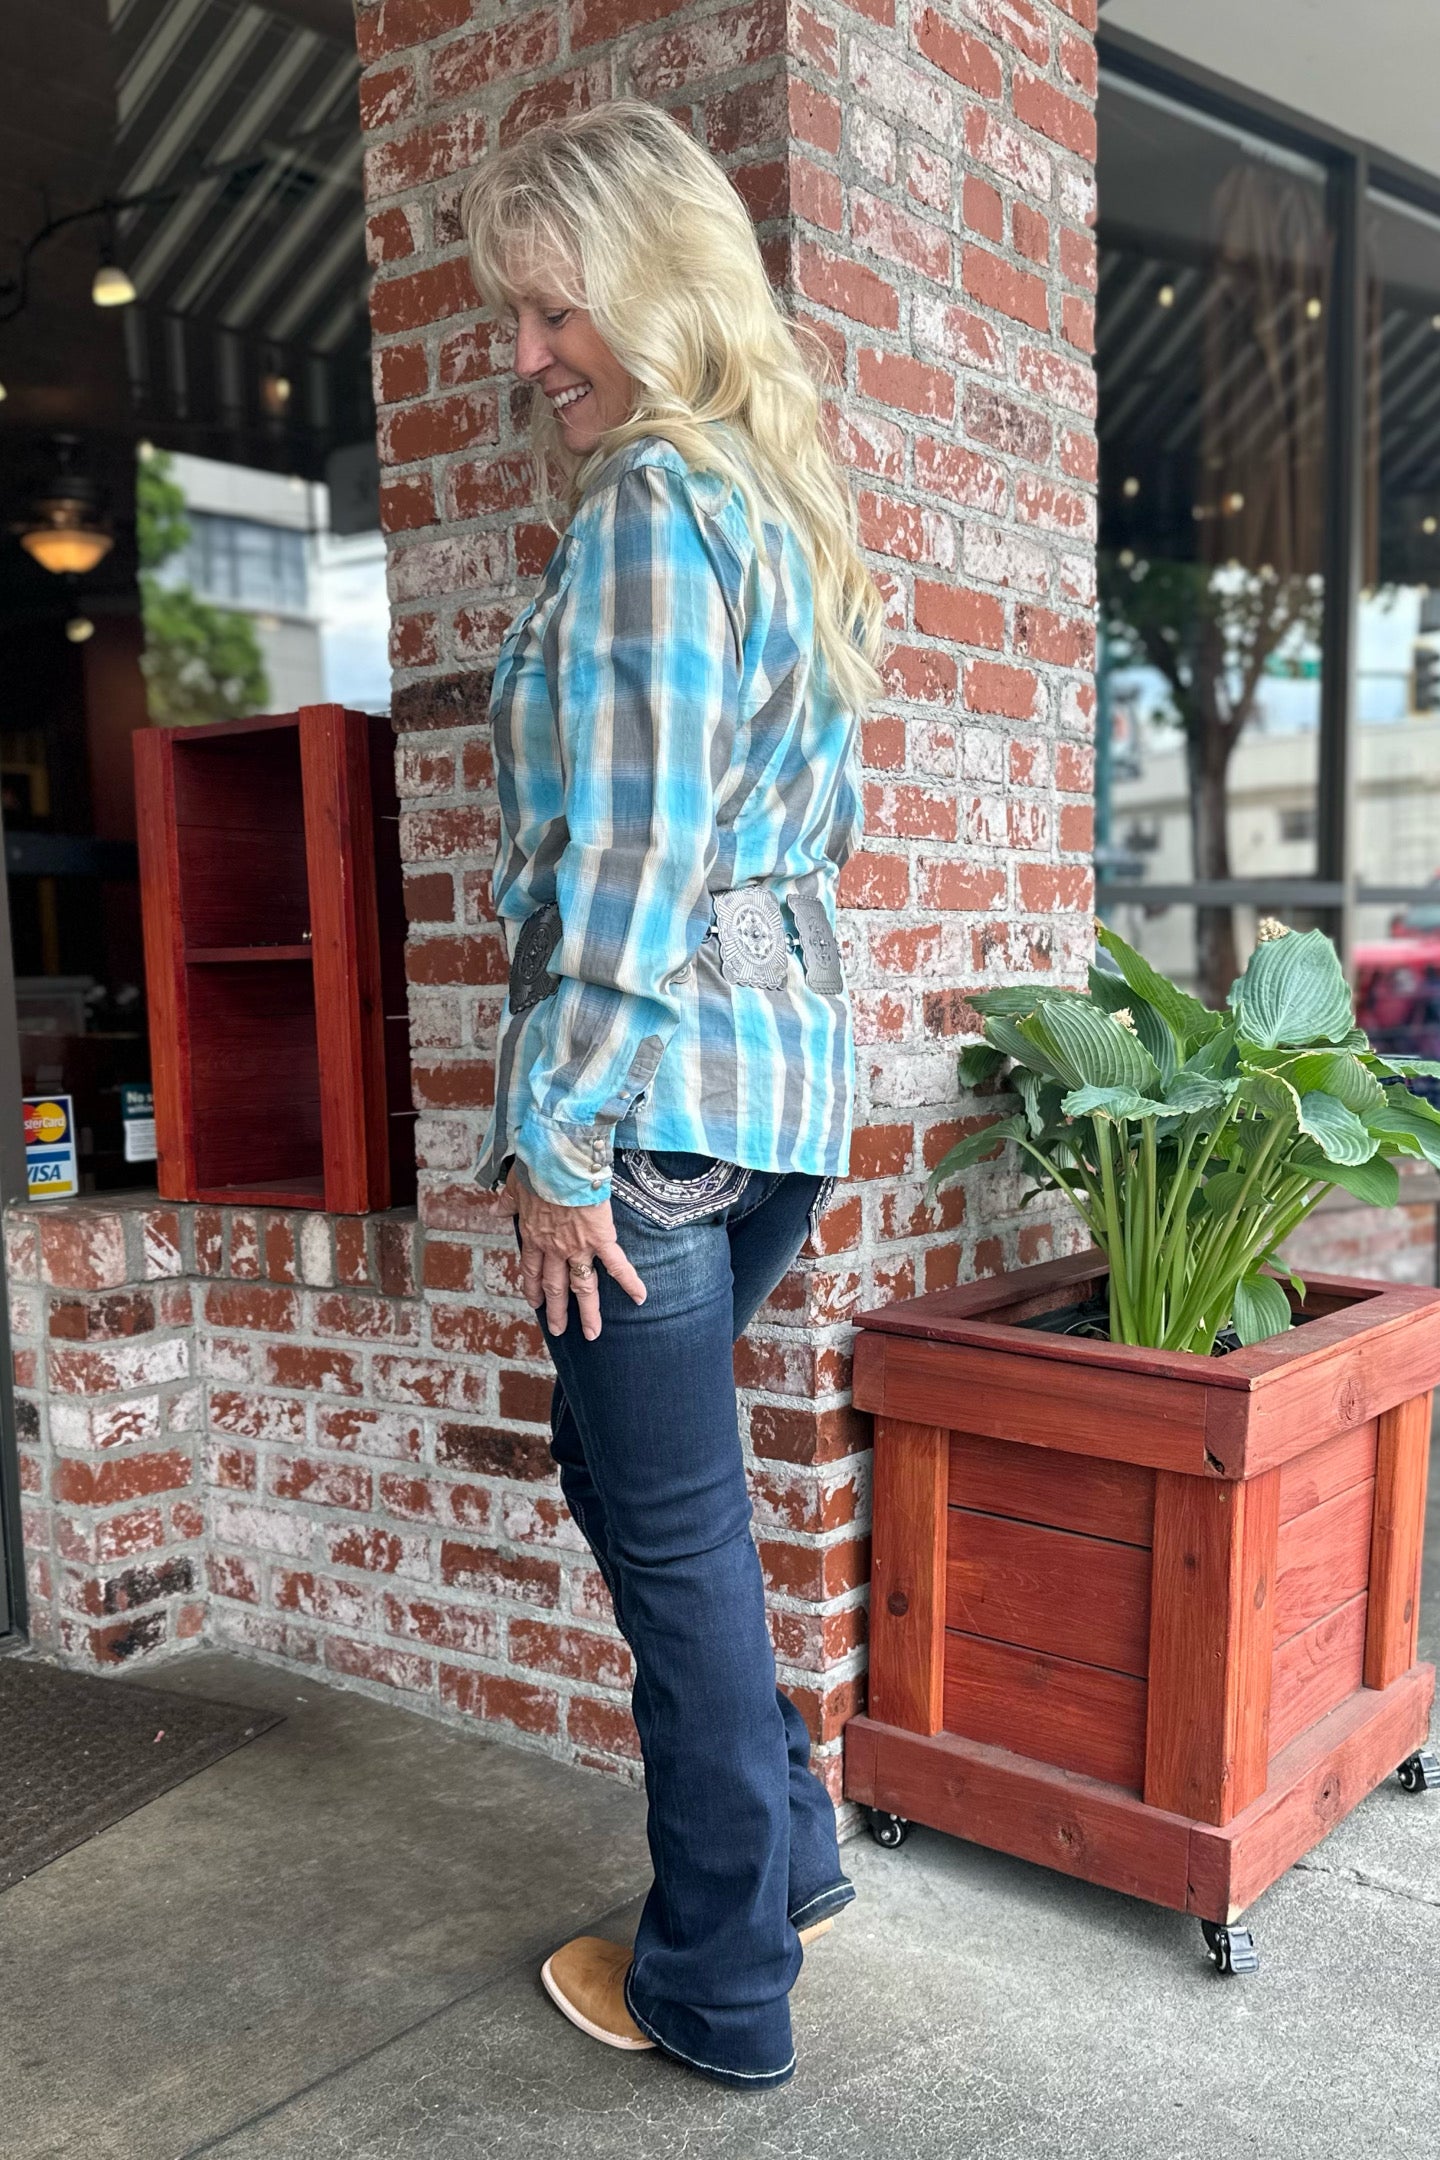 Ladies Roper Western Snap Shirt in Beach Dobby Plaid by Roper-Top-Roper/Stetson-Gallop 'n Glitz- Women's Western Wear Boutique, Located in Grants Pass, Oregon